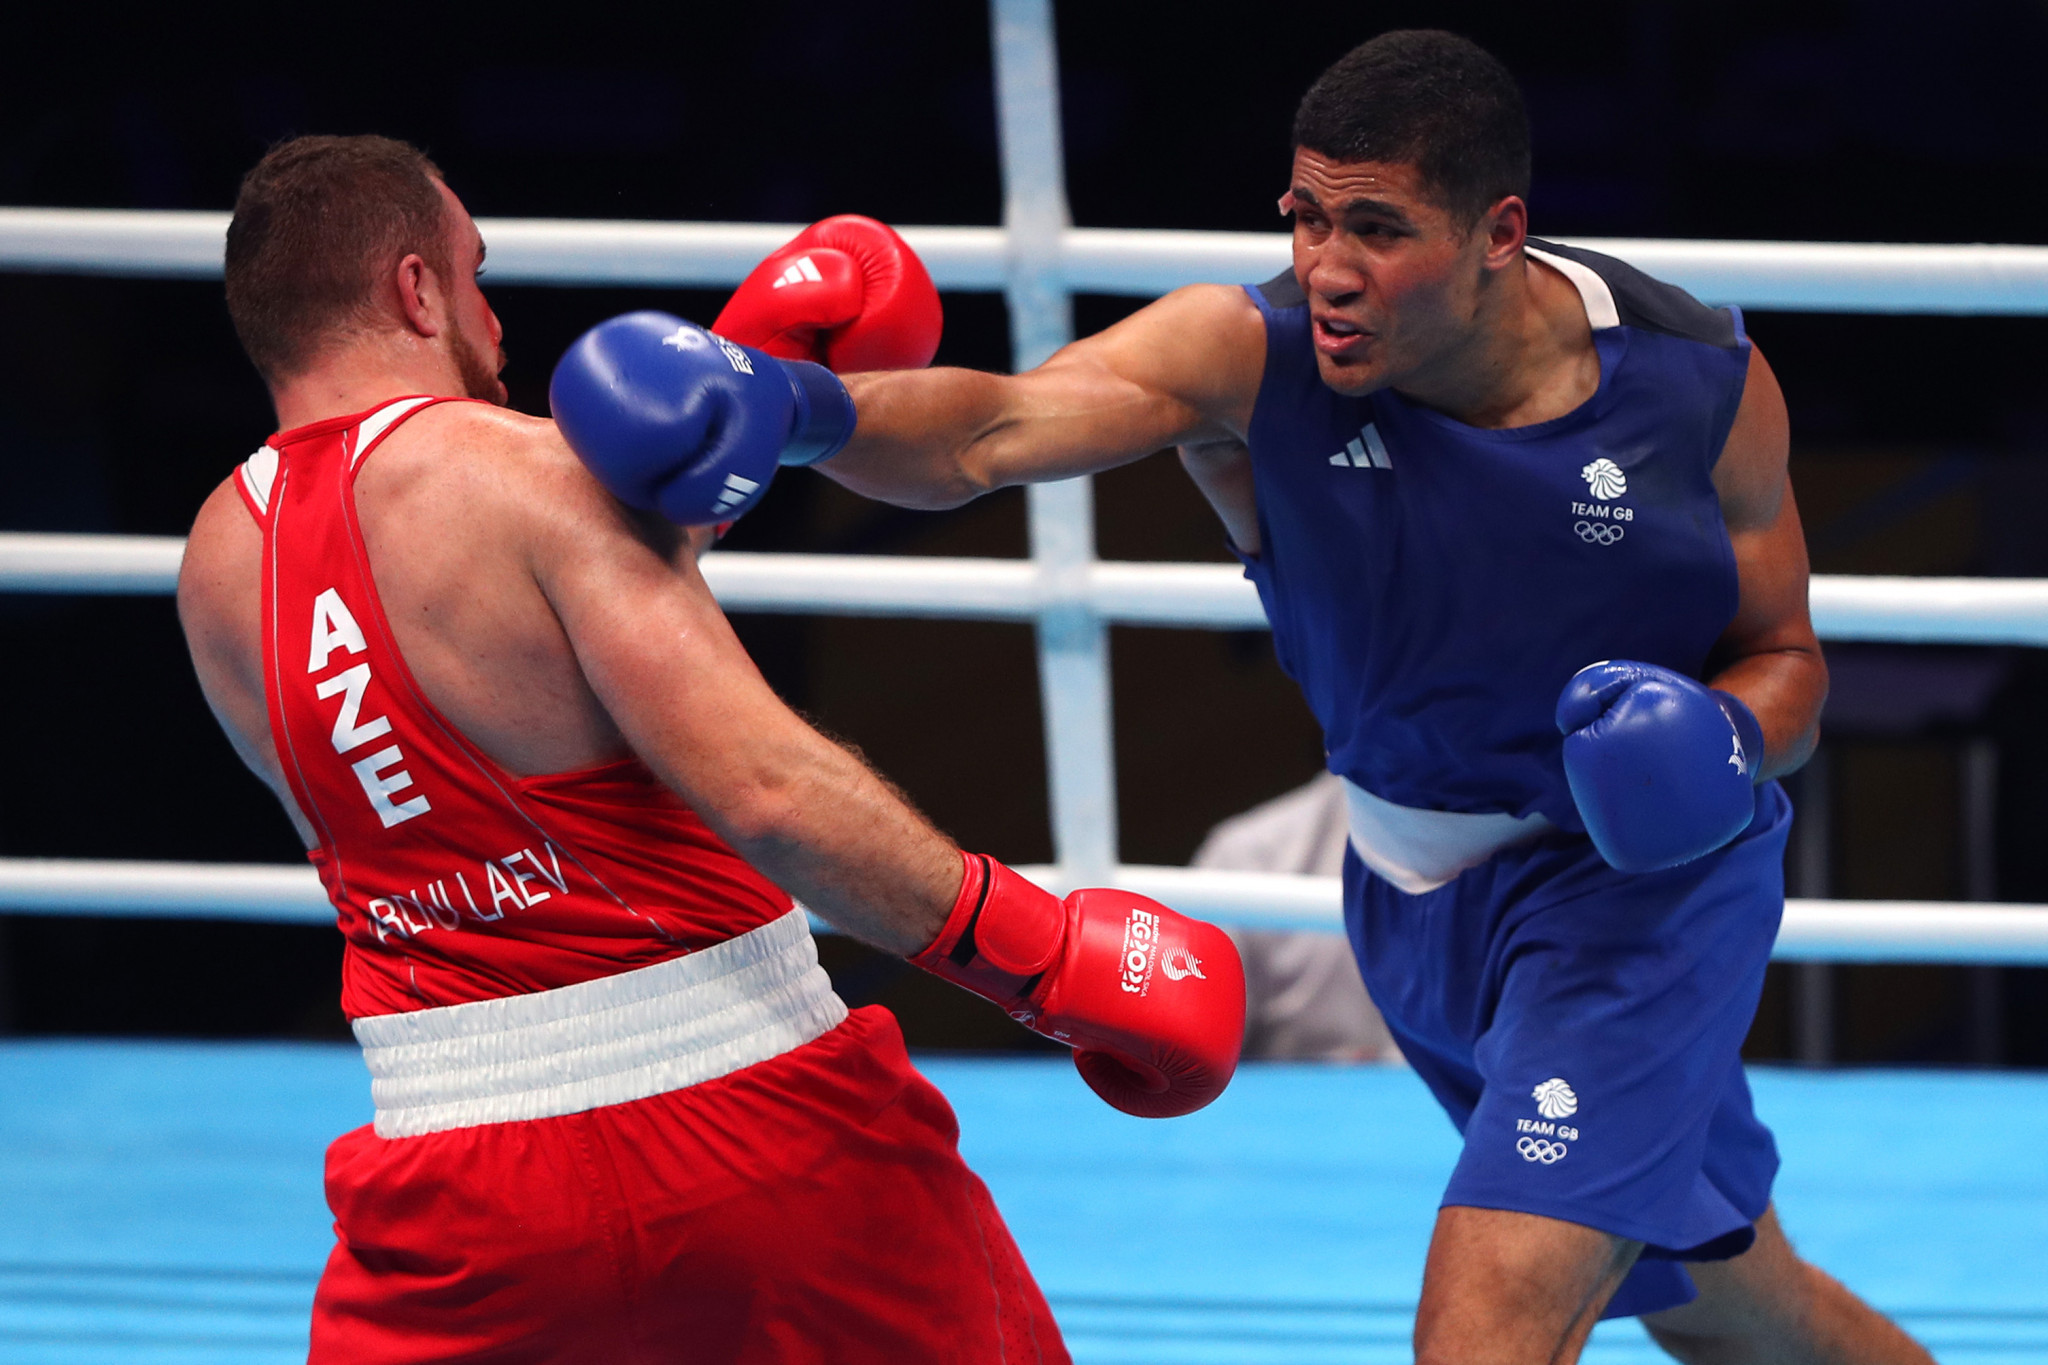 Delicious Orie of Britain, right, won the final boxing gold at the European Games with victory over Azerbaijan's Mahammad Abdullayev, left, in the men's over-92 kg ©Kraków-Malopolska 2023